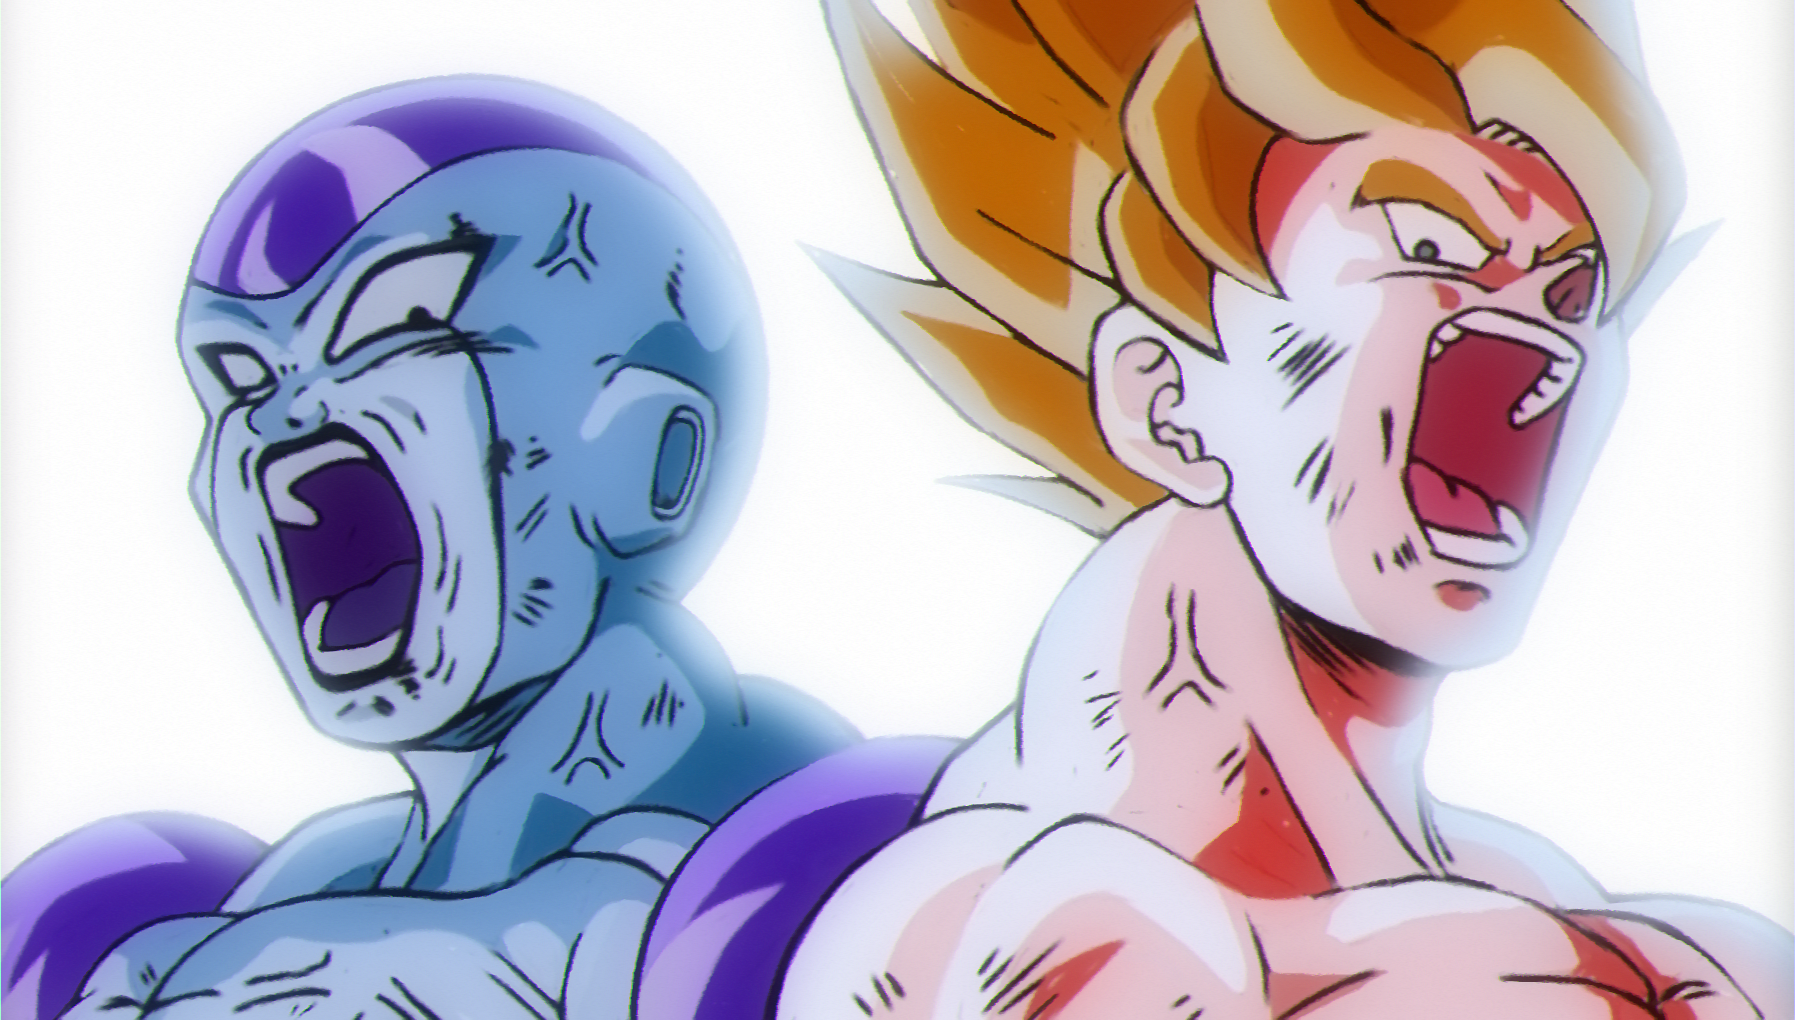 Goku and Freezer from DBS in DBZ's style by The-Radger457 on DeviantArt